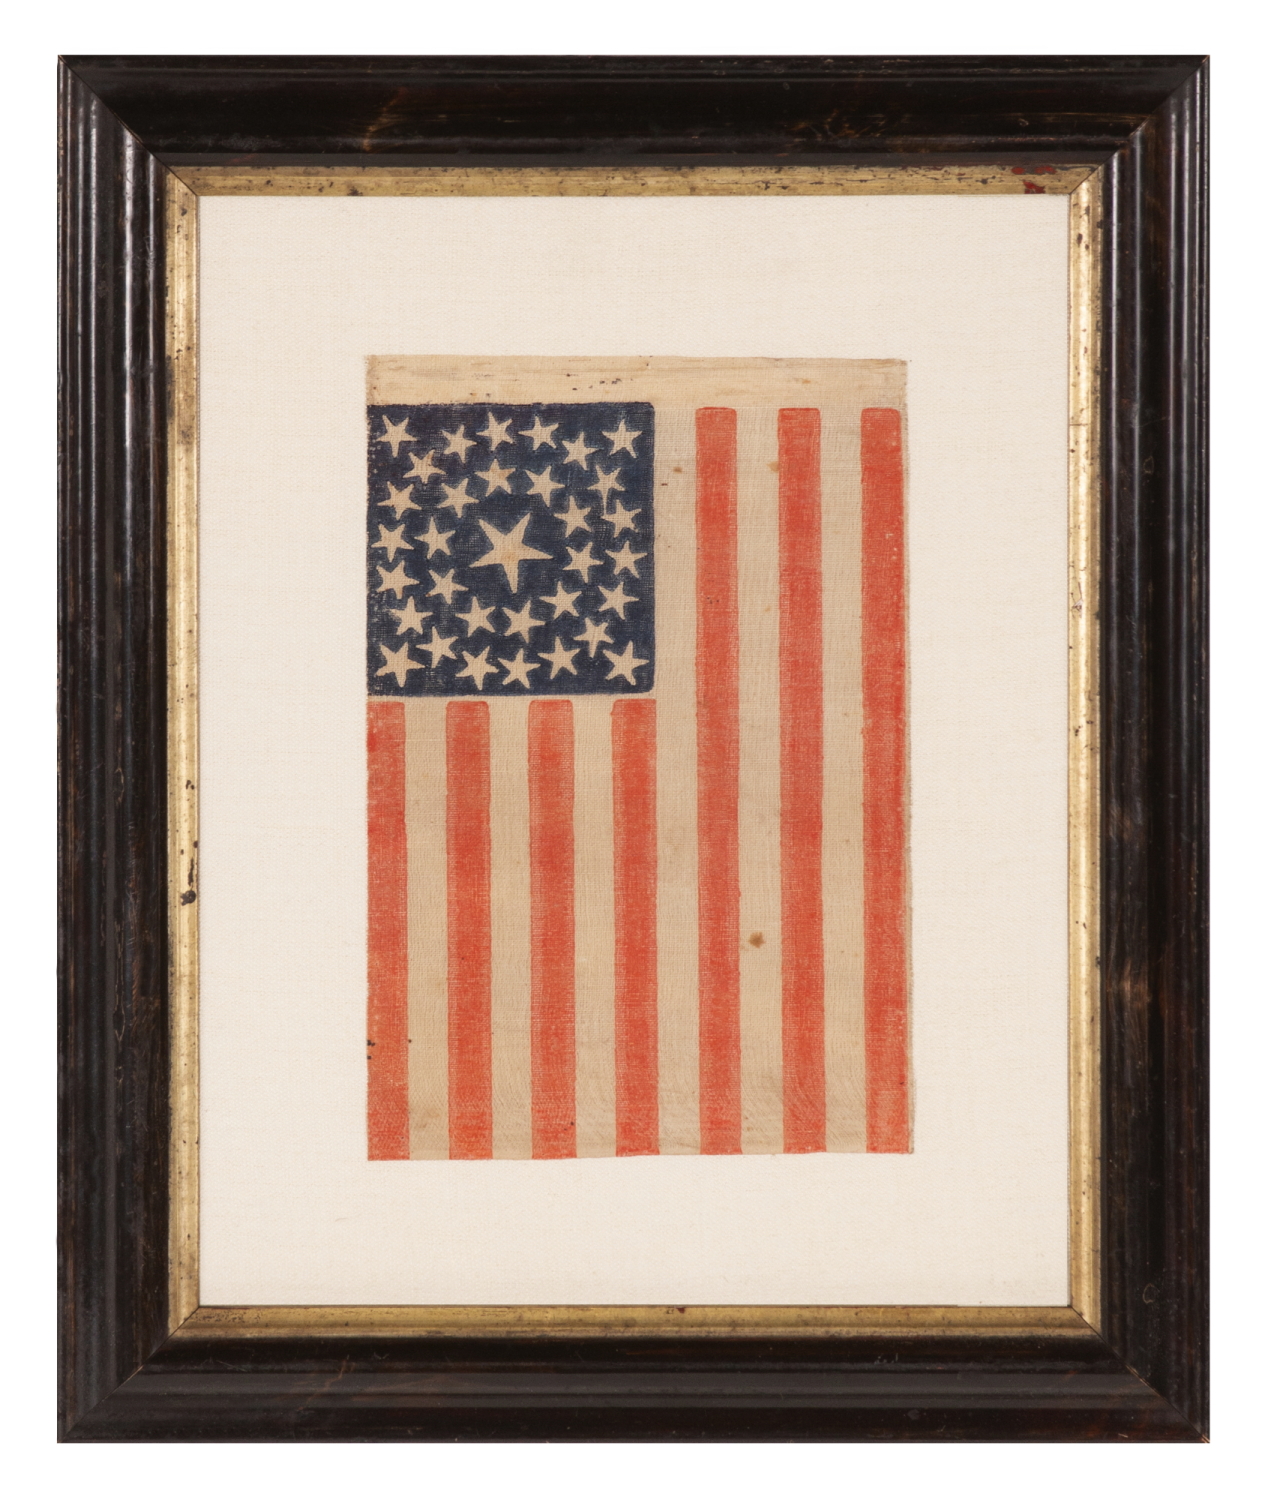 33 STARS IN A DOUBLE-WREATH CONFIGURATION, ON AN ANTIQUE AMERICAN FLAG DATING IMMEDIATELY PRE-CIVIL WAR THROUGH THE WAR'S OPENING YEAR, REFLECTS THE ADDITION OF OREGON TO THE UNION, 1859-1861